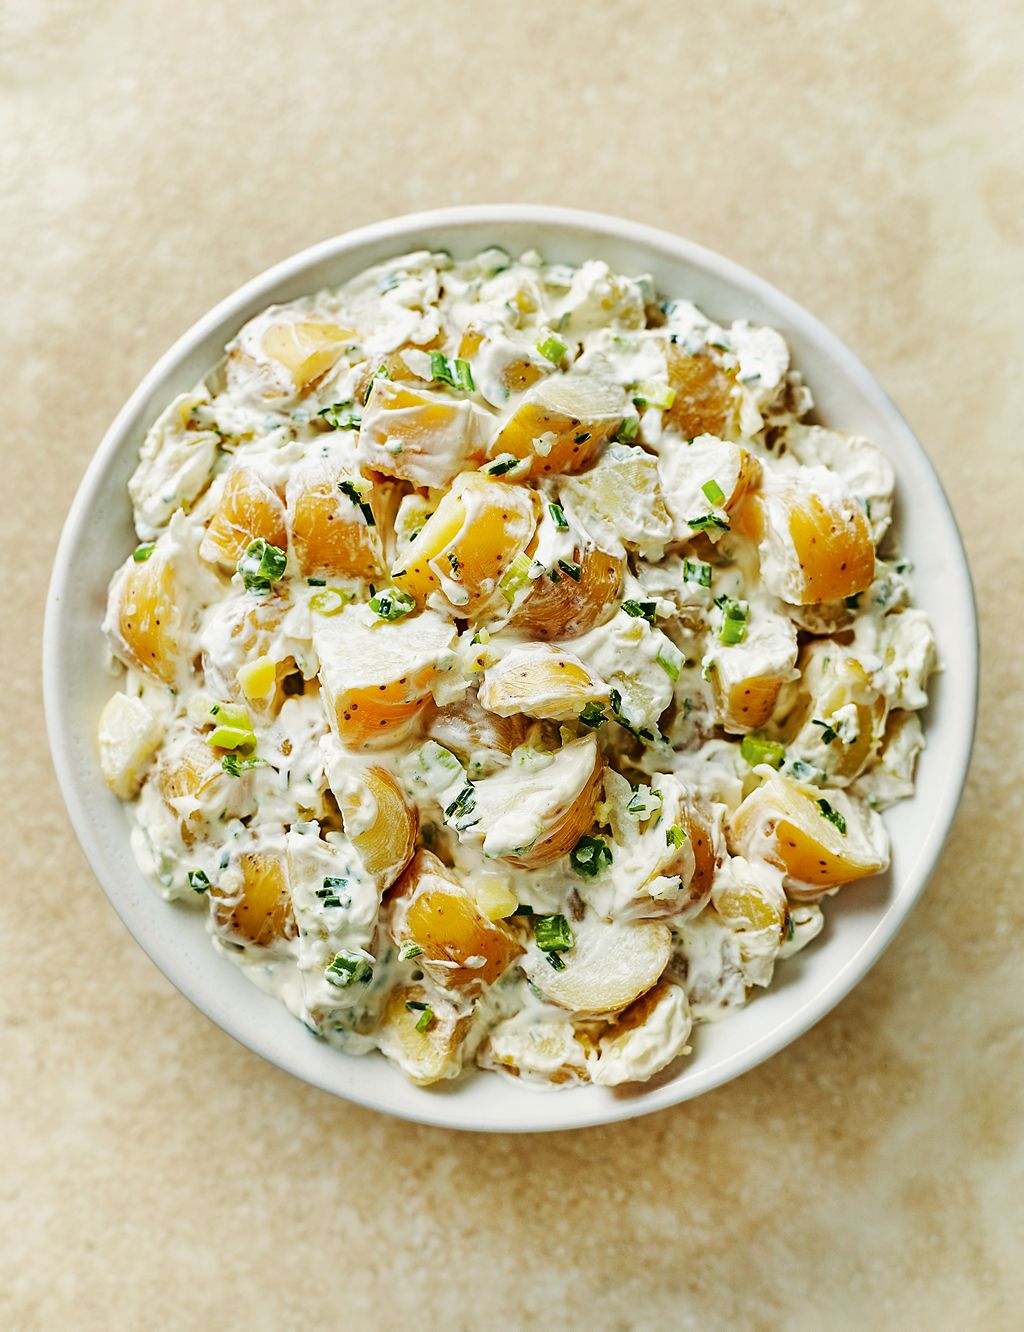 Baby Charlotte Potato Salad (Serves 6-8) - (Last Collection Date 30th September 2020) 3 of 3